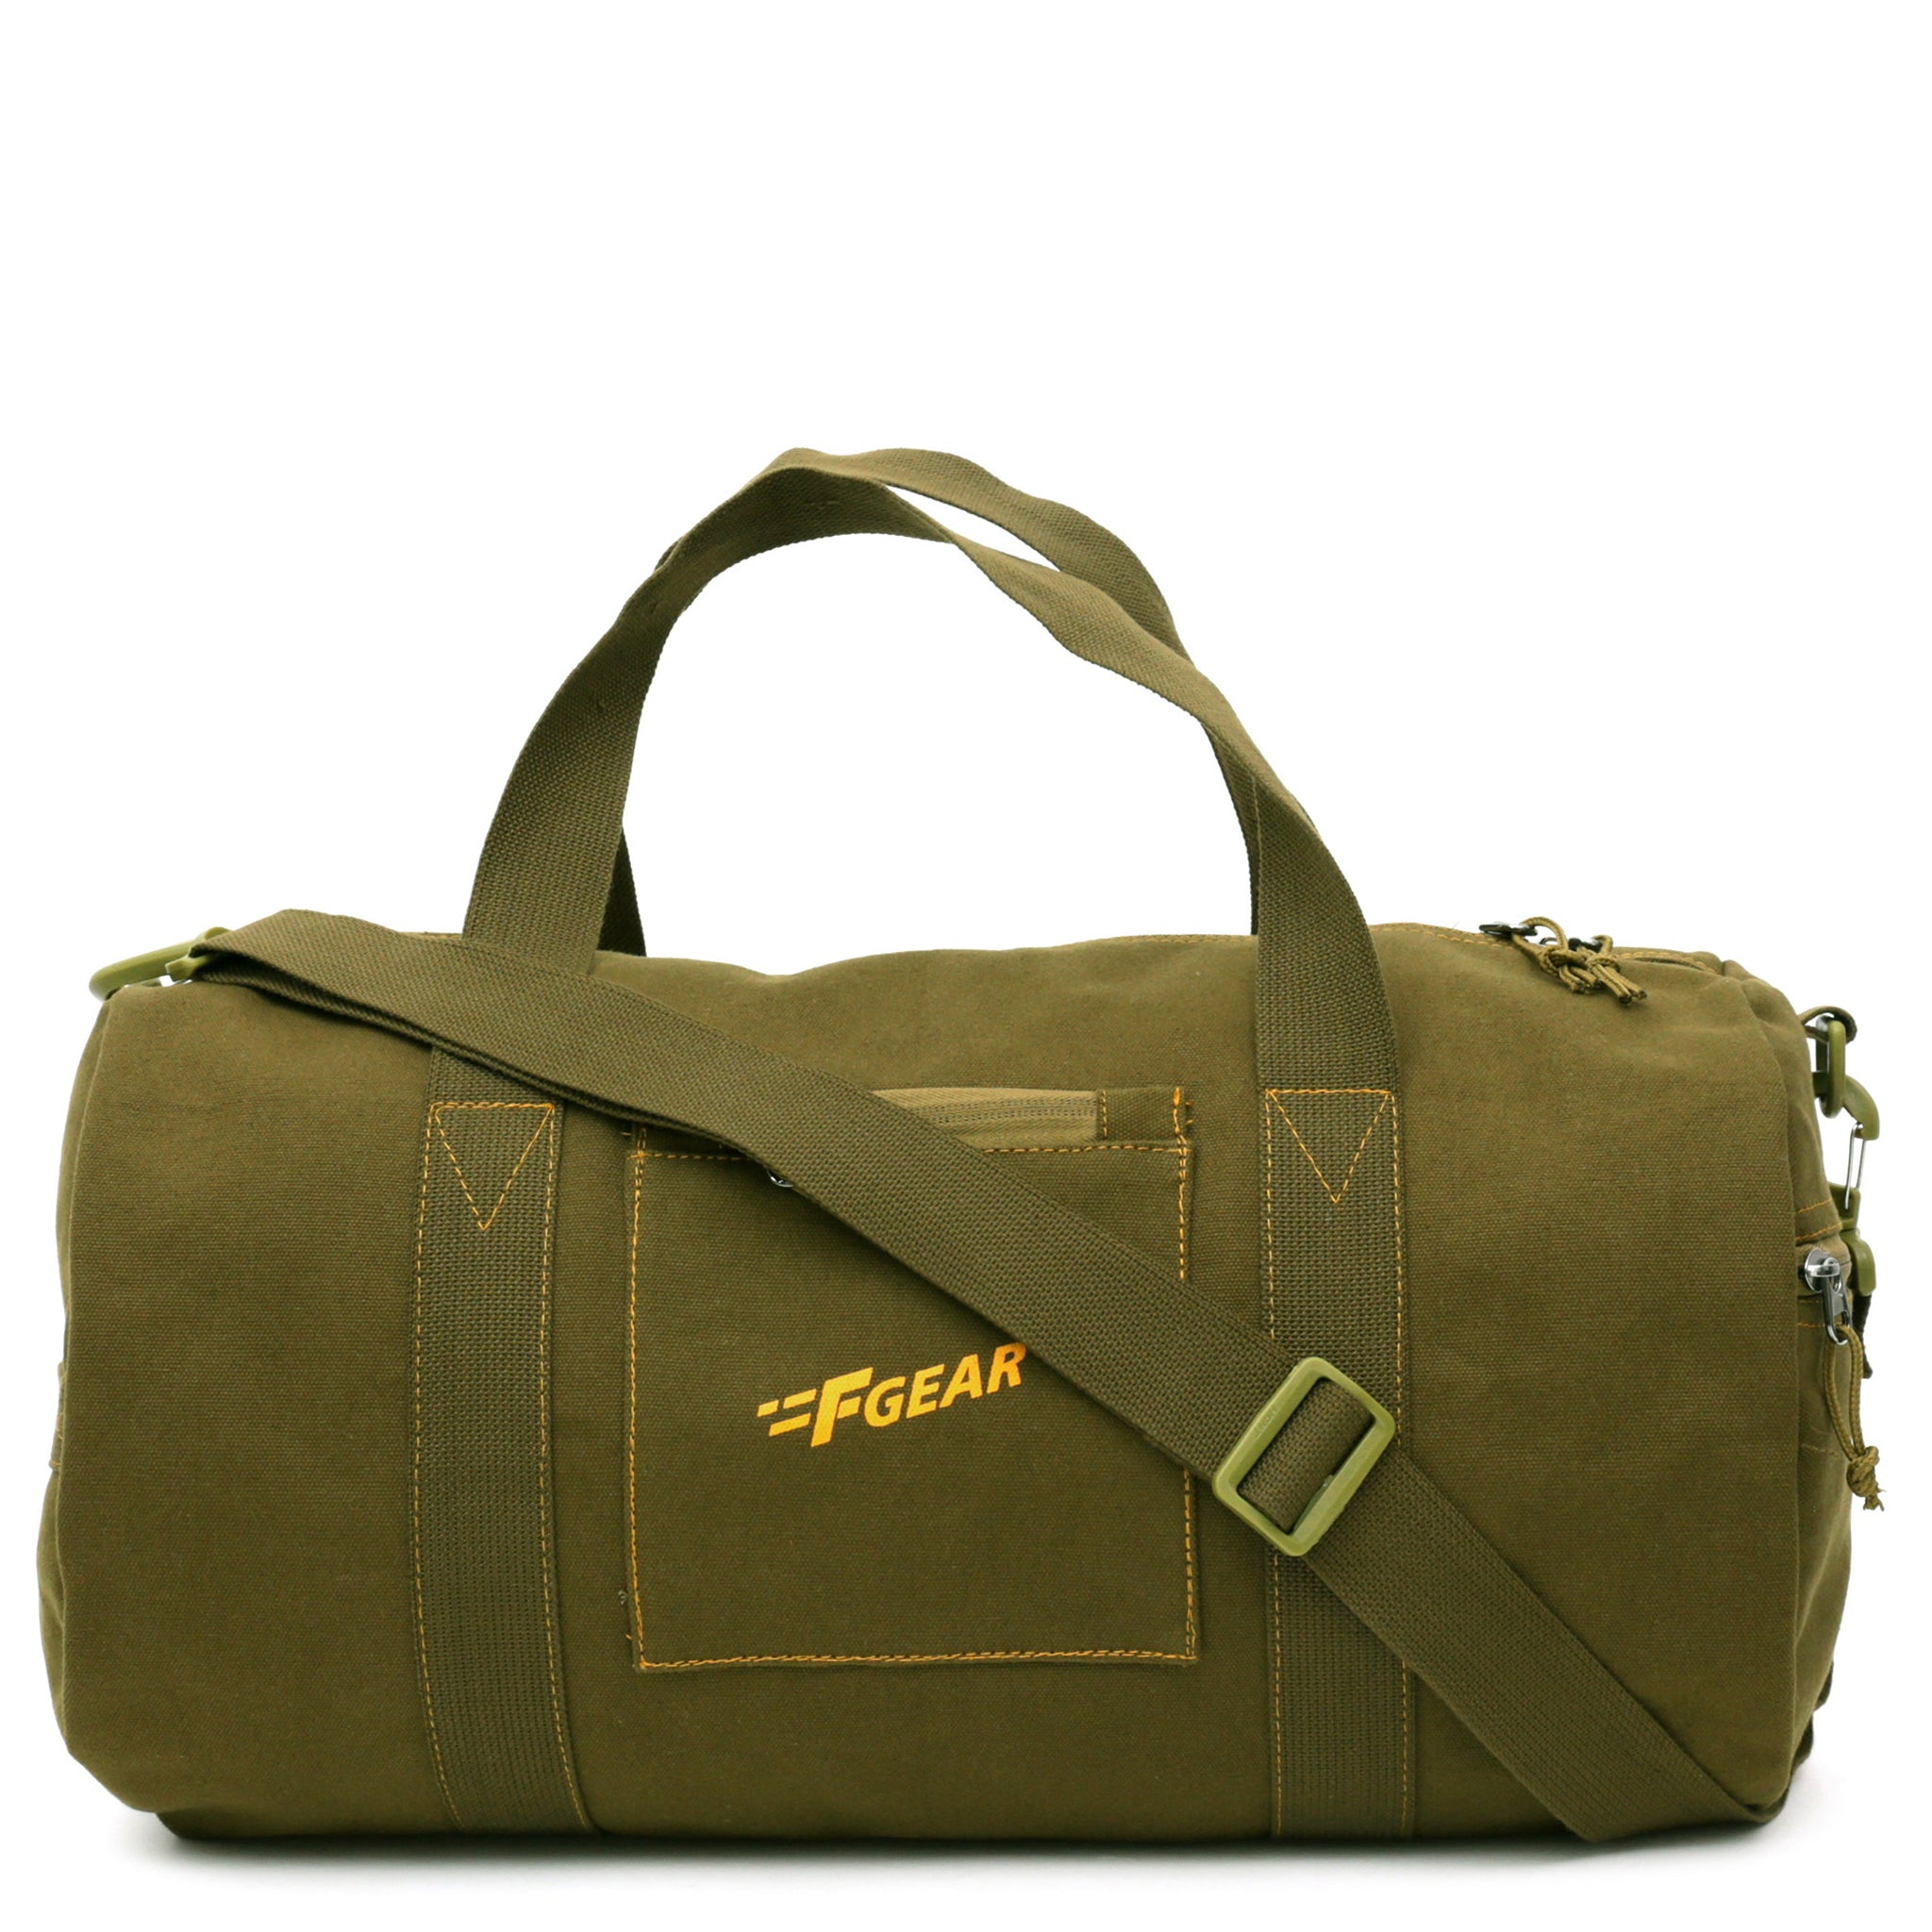 Overlander Waxed Canvas and Leather Duffle | Build to go where you go